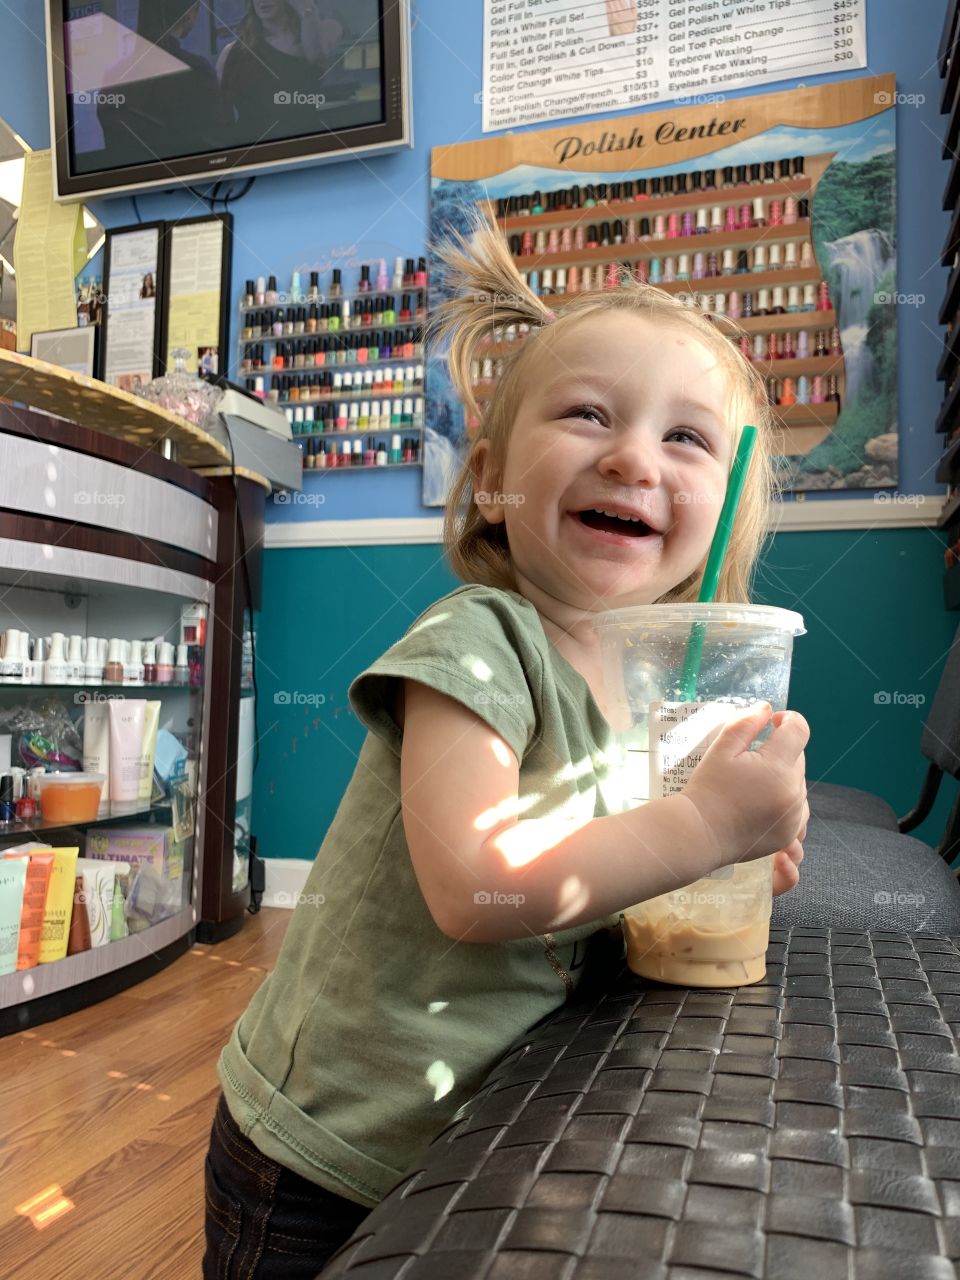 Giggles over mommy’s coffee